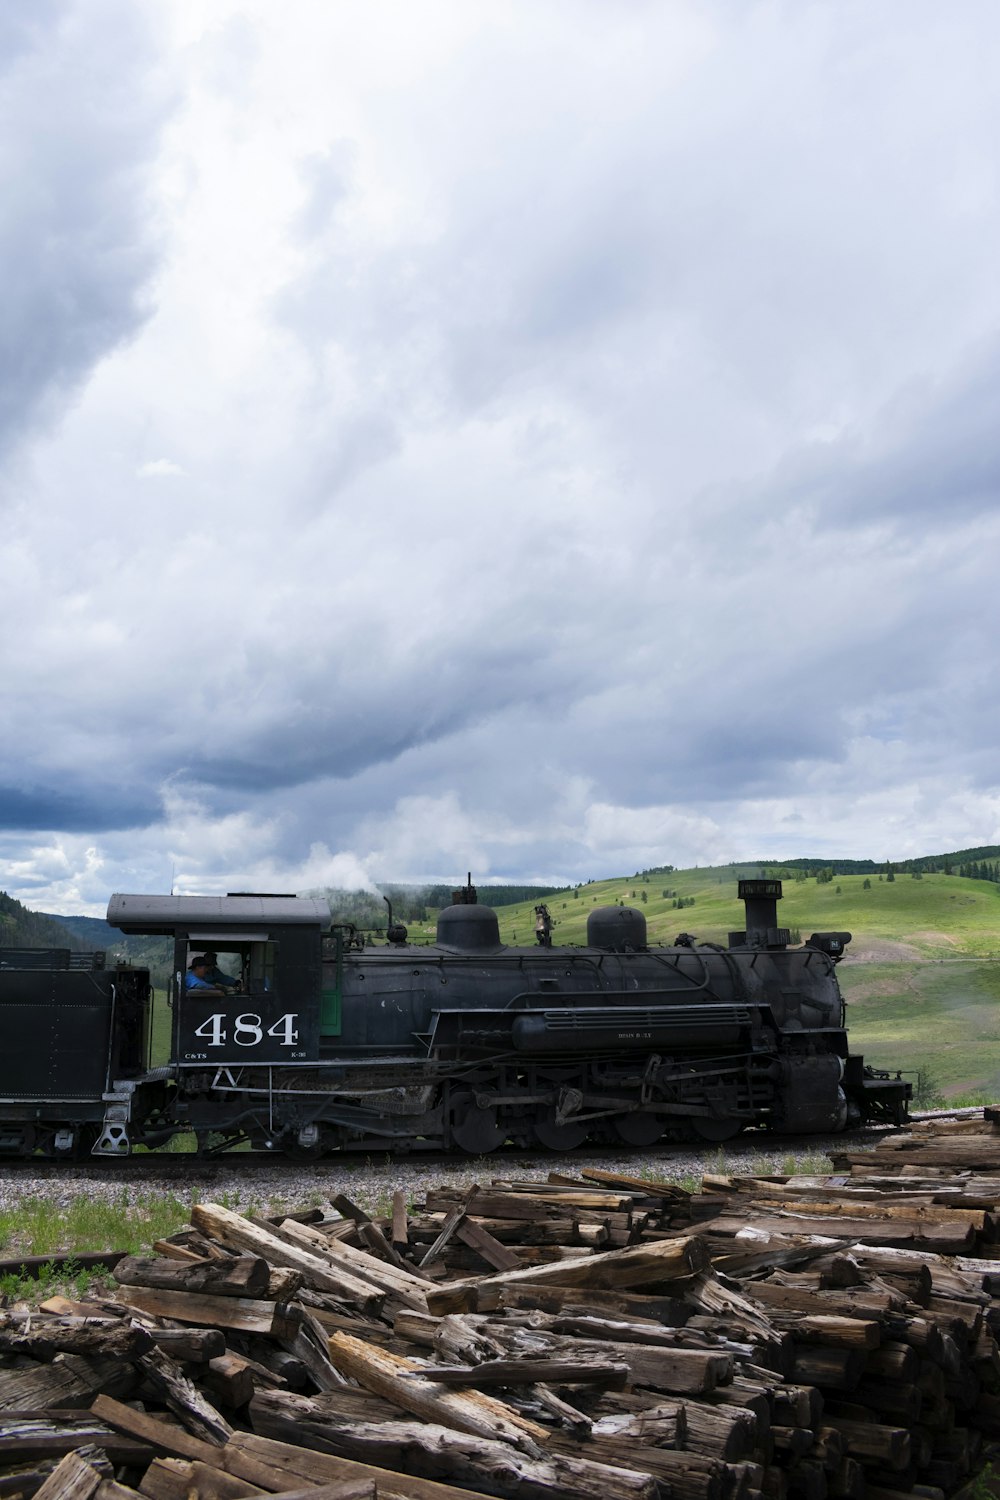 green and black train under white clouds during daytime